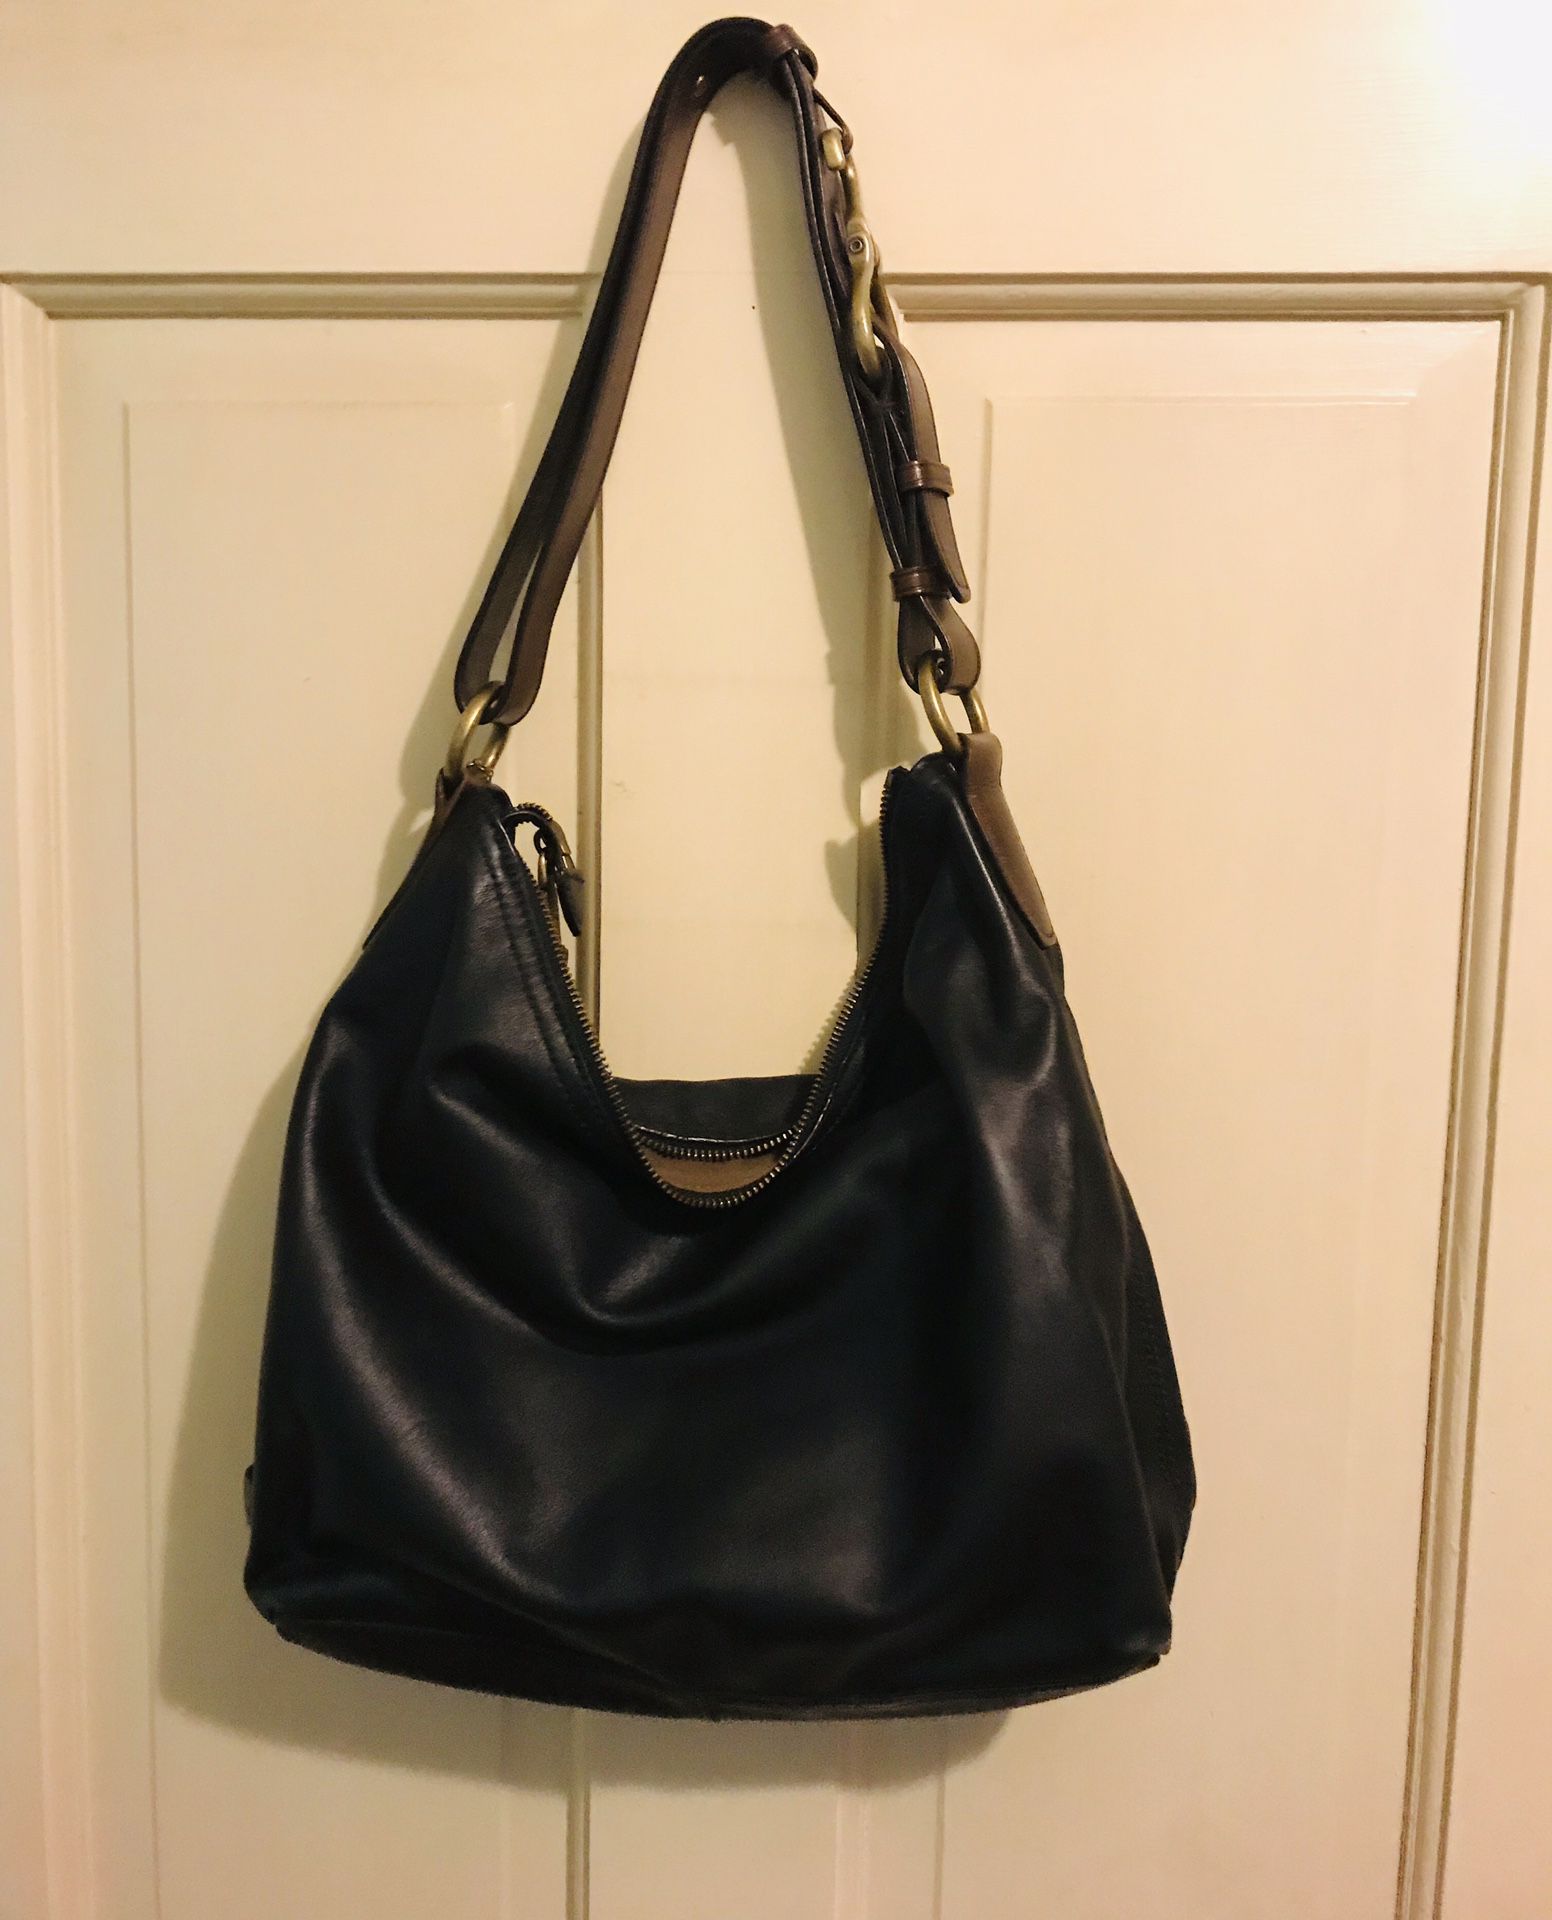 Cole Haan Soft Leather Hobo Shoulder Bag (12” W 15”L) with Gold Buckle and Brown Fabrics and Pockets Inside. Very Food Condition